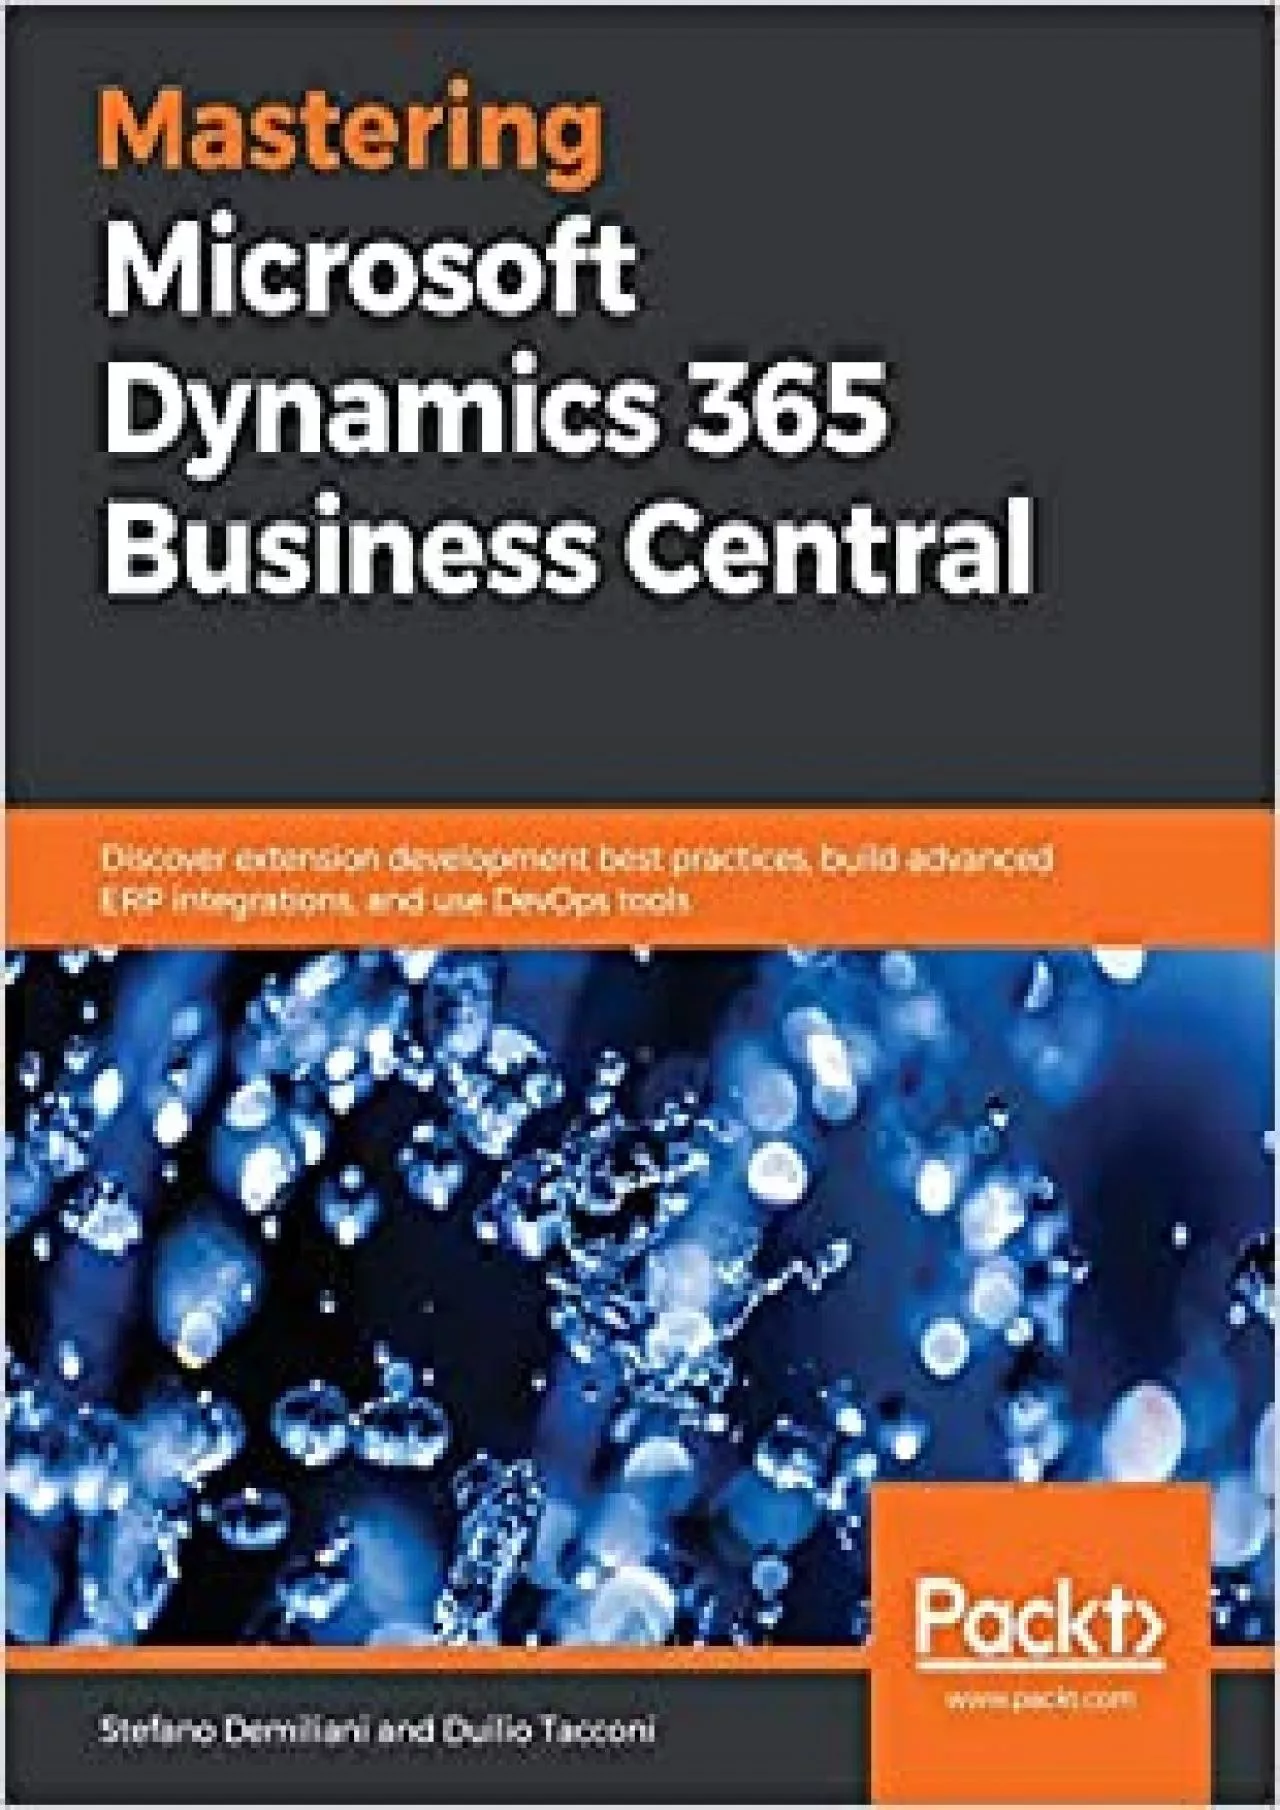 Mastering Microsoft Dynamics 365 Business Central: Discover extension development best